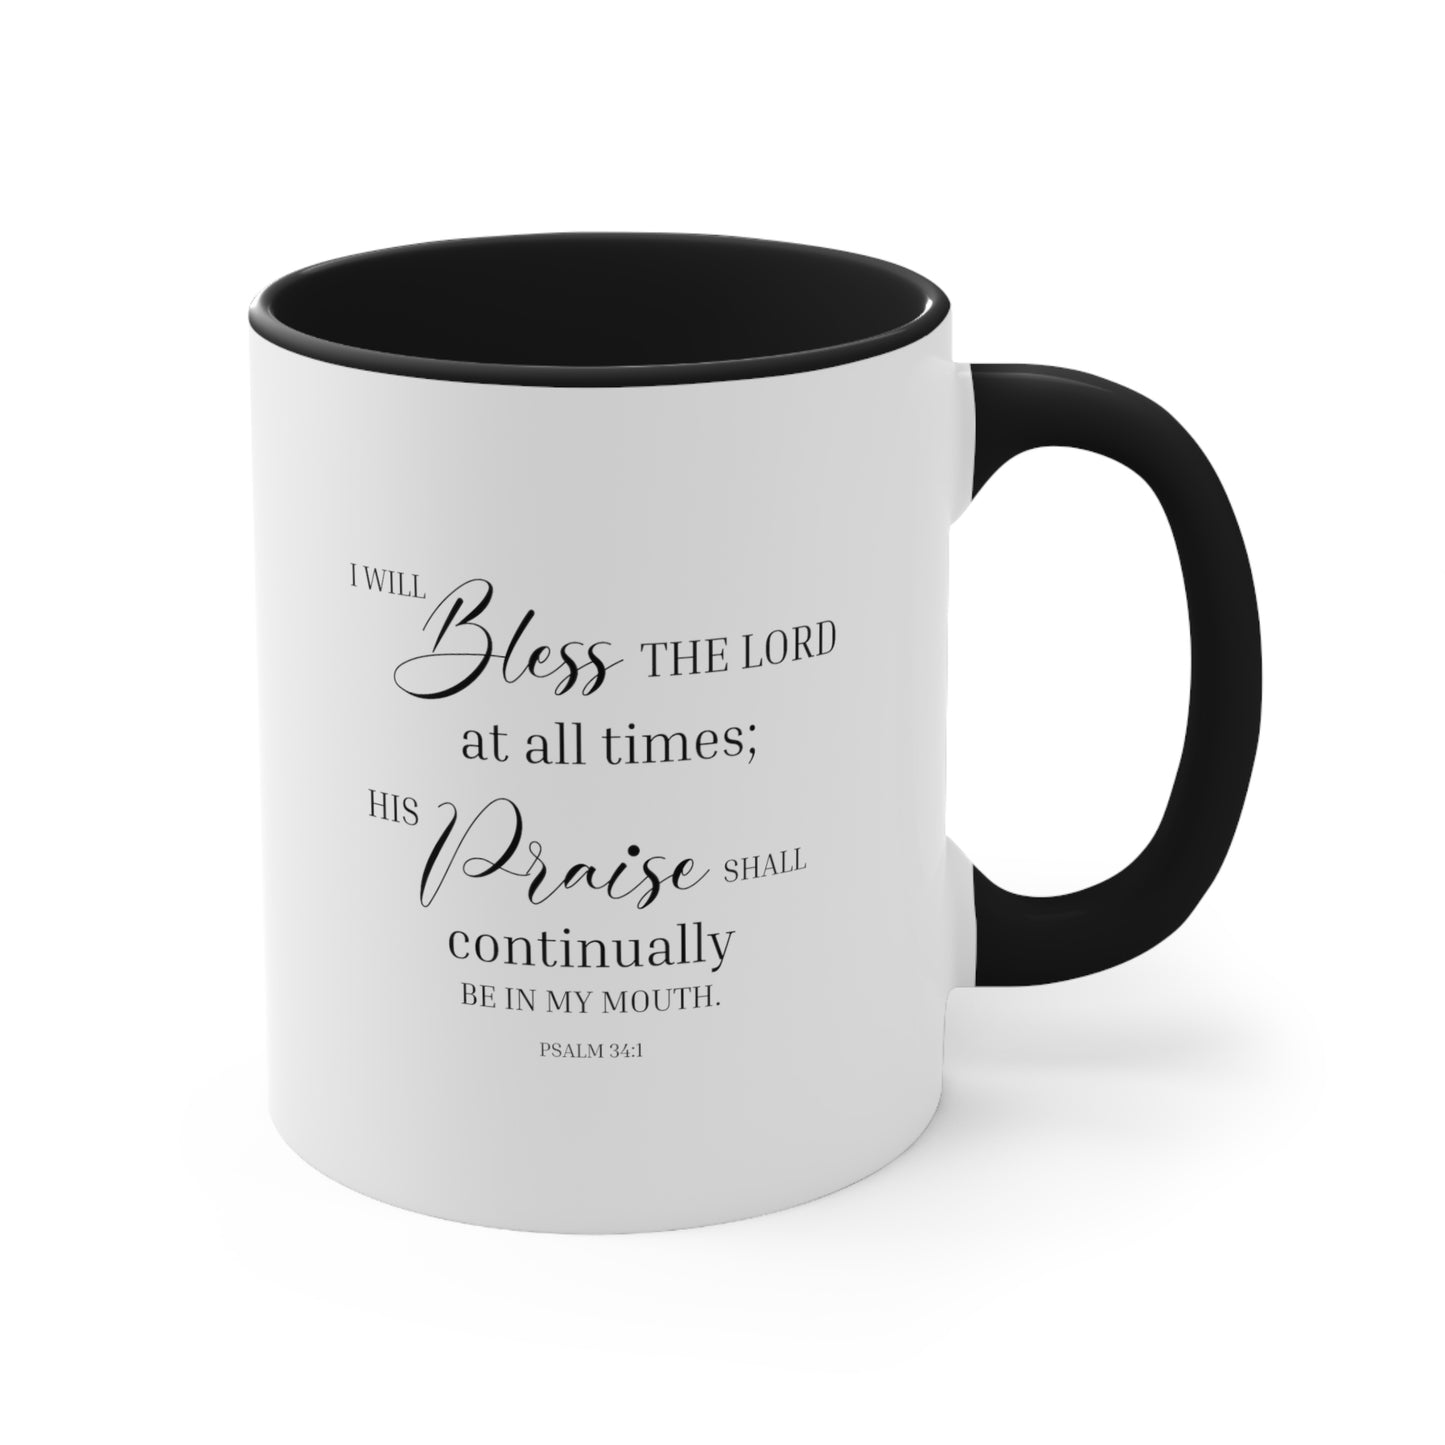 Bless The Lord Accent Coffee Mug, 11oz, Christian Gift, Faith Gift, Inspirational Gift